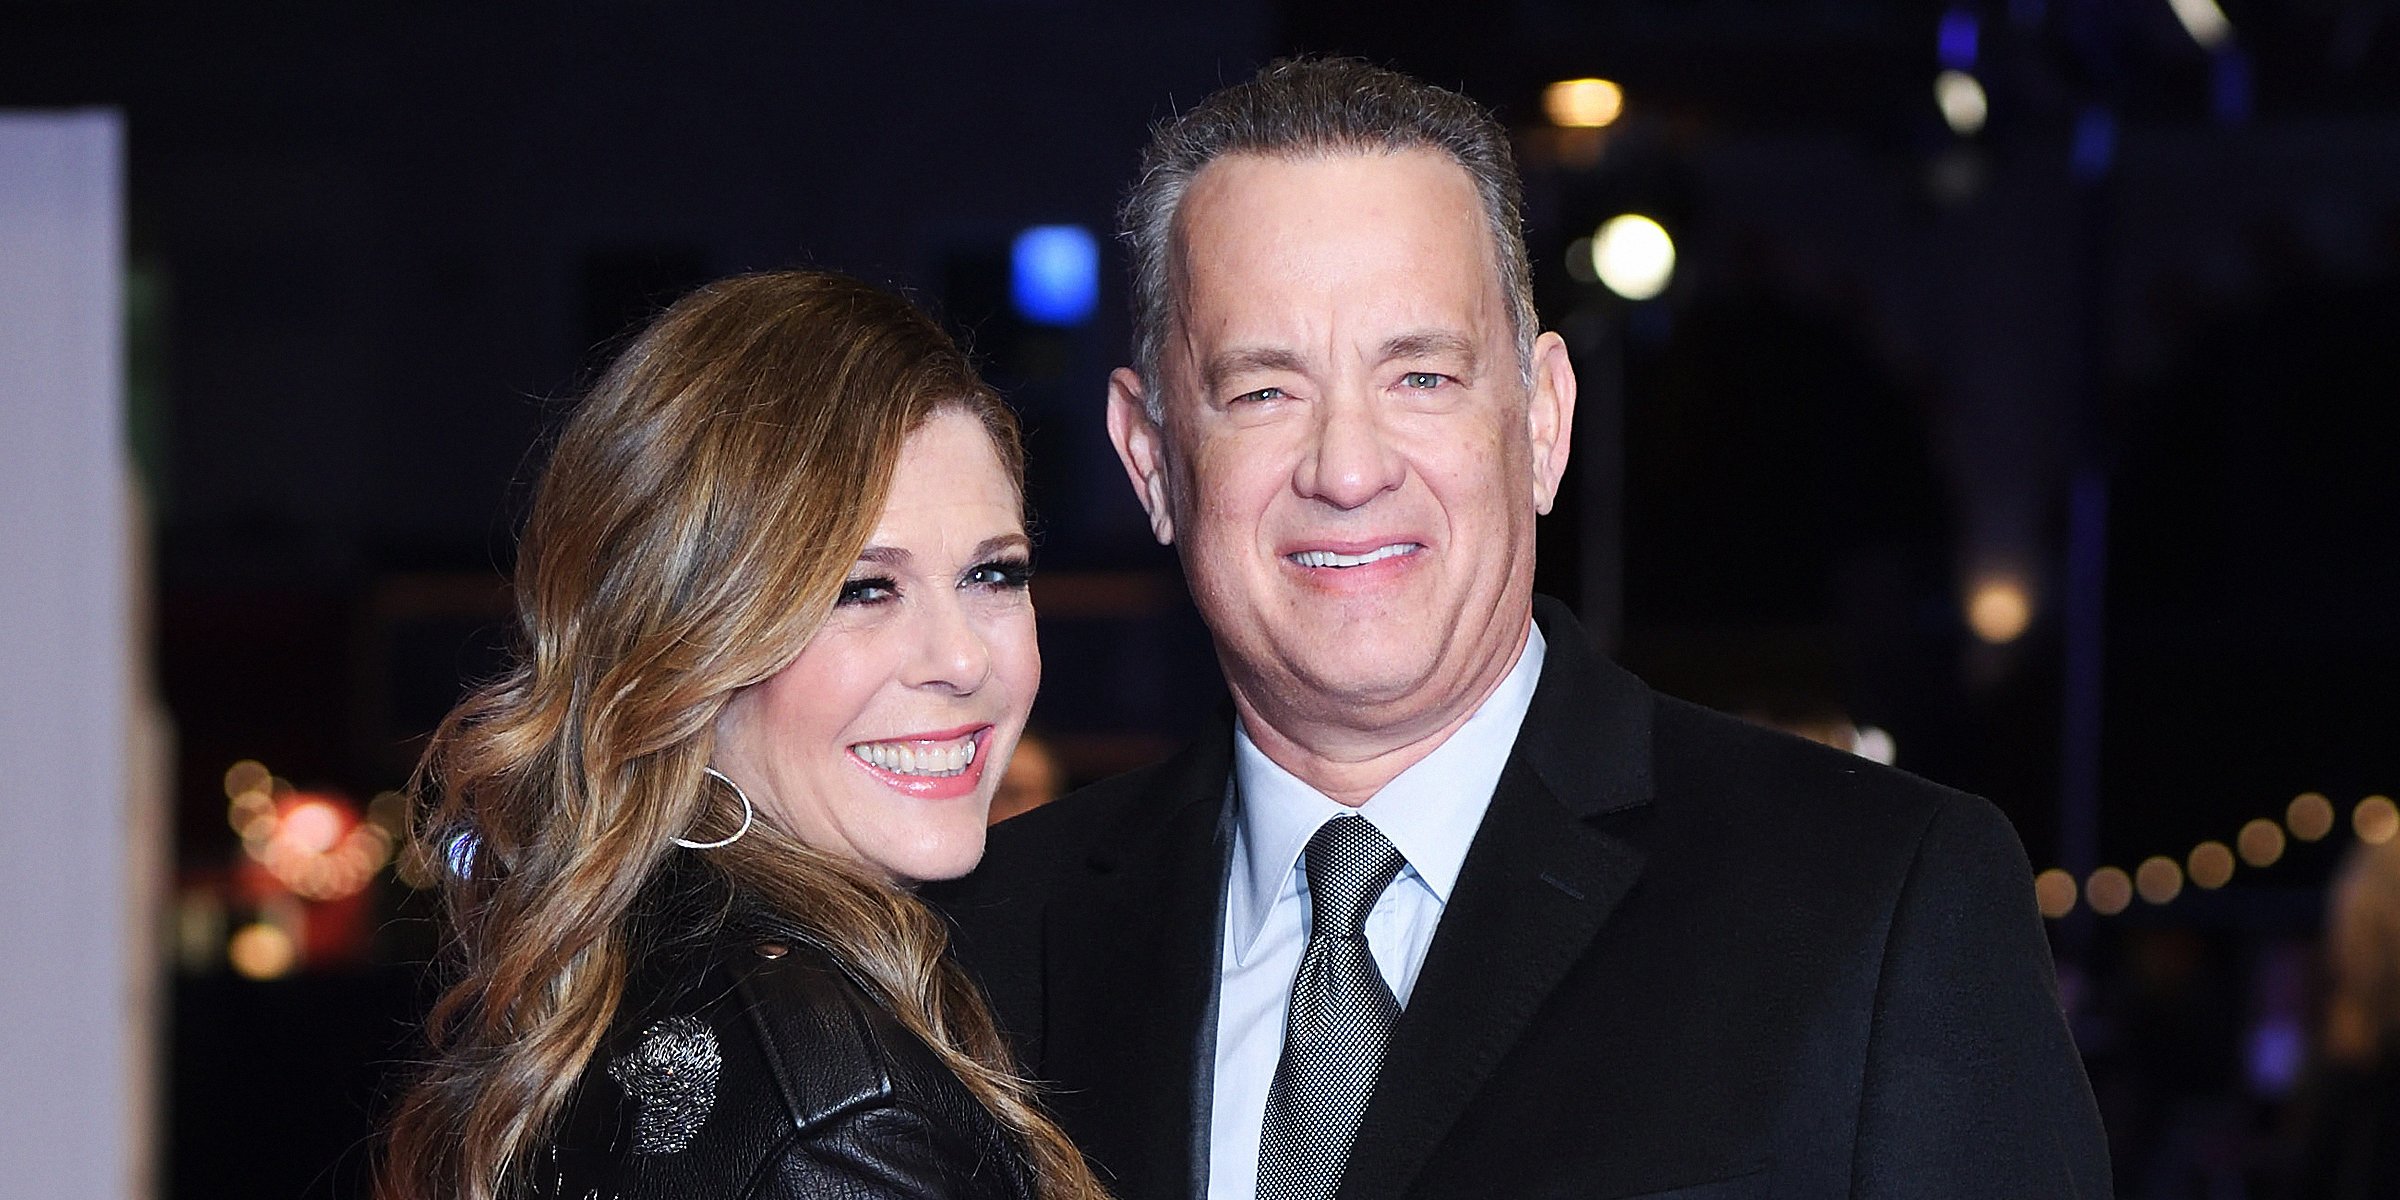 Rita Wilson and Tom Hanks. | Source: Getty Images